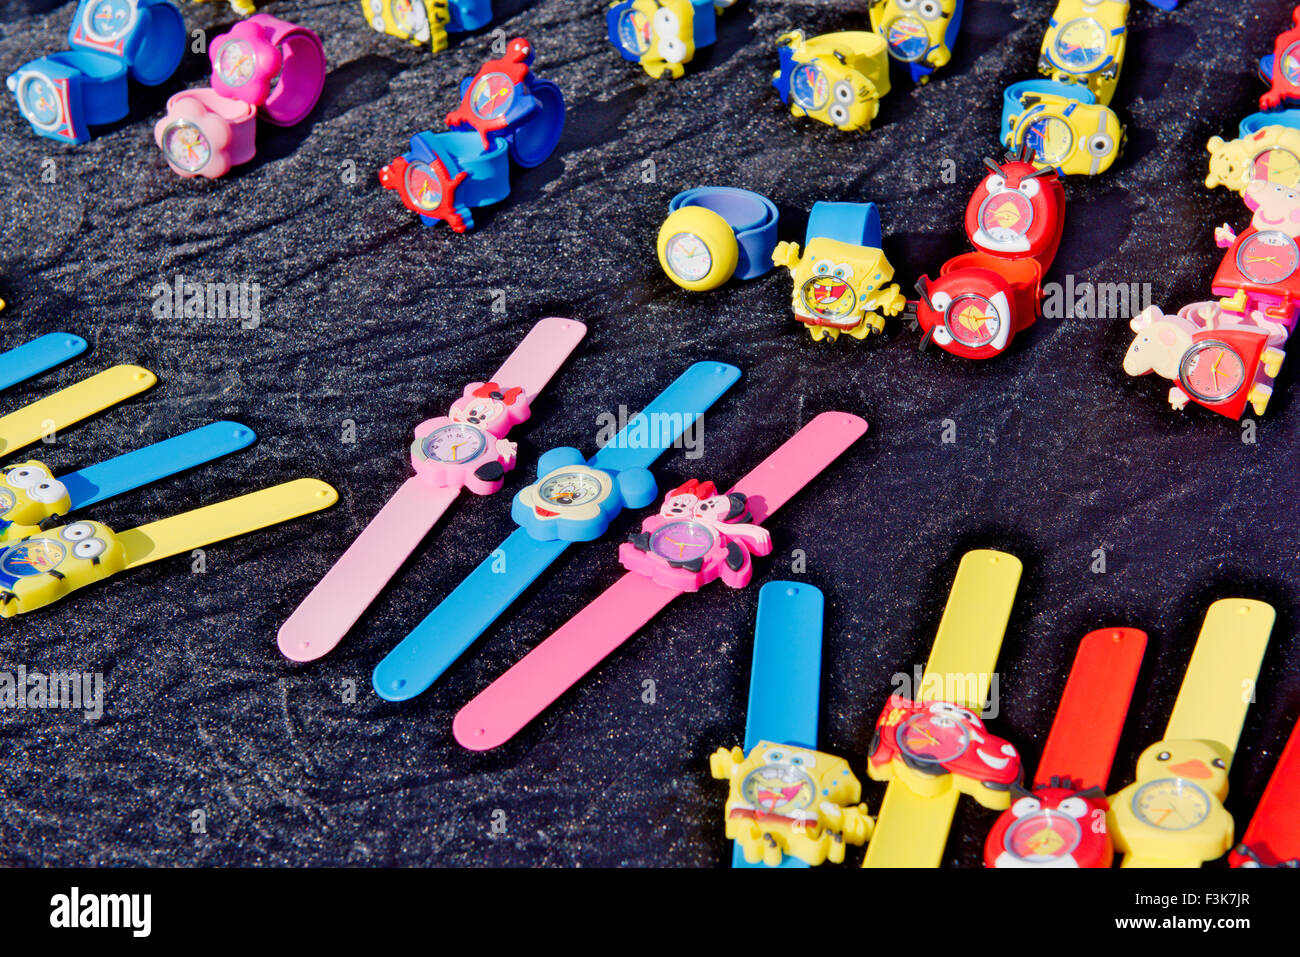 Children's watches with cartoon characters on display at outdoor market stall, UK Stock Photo